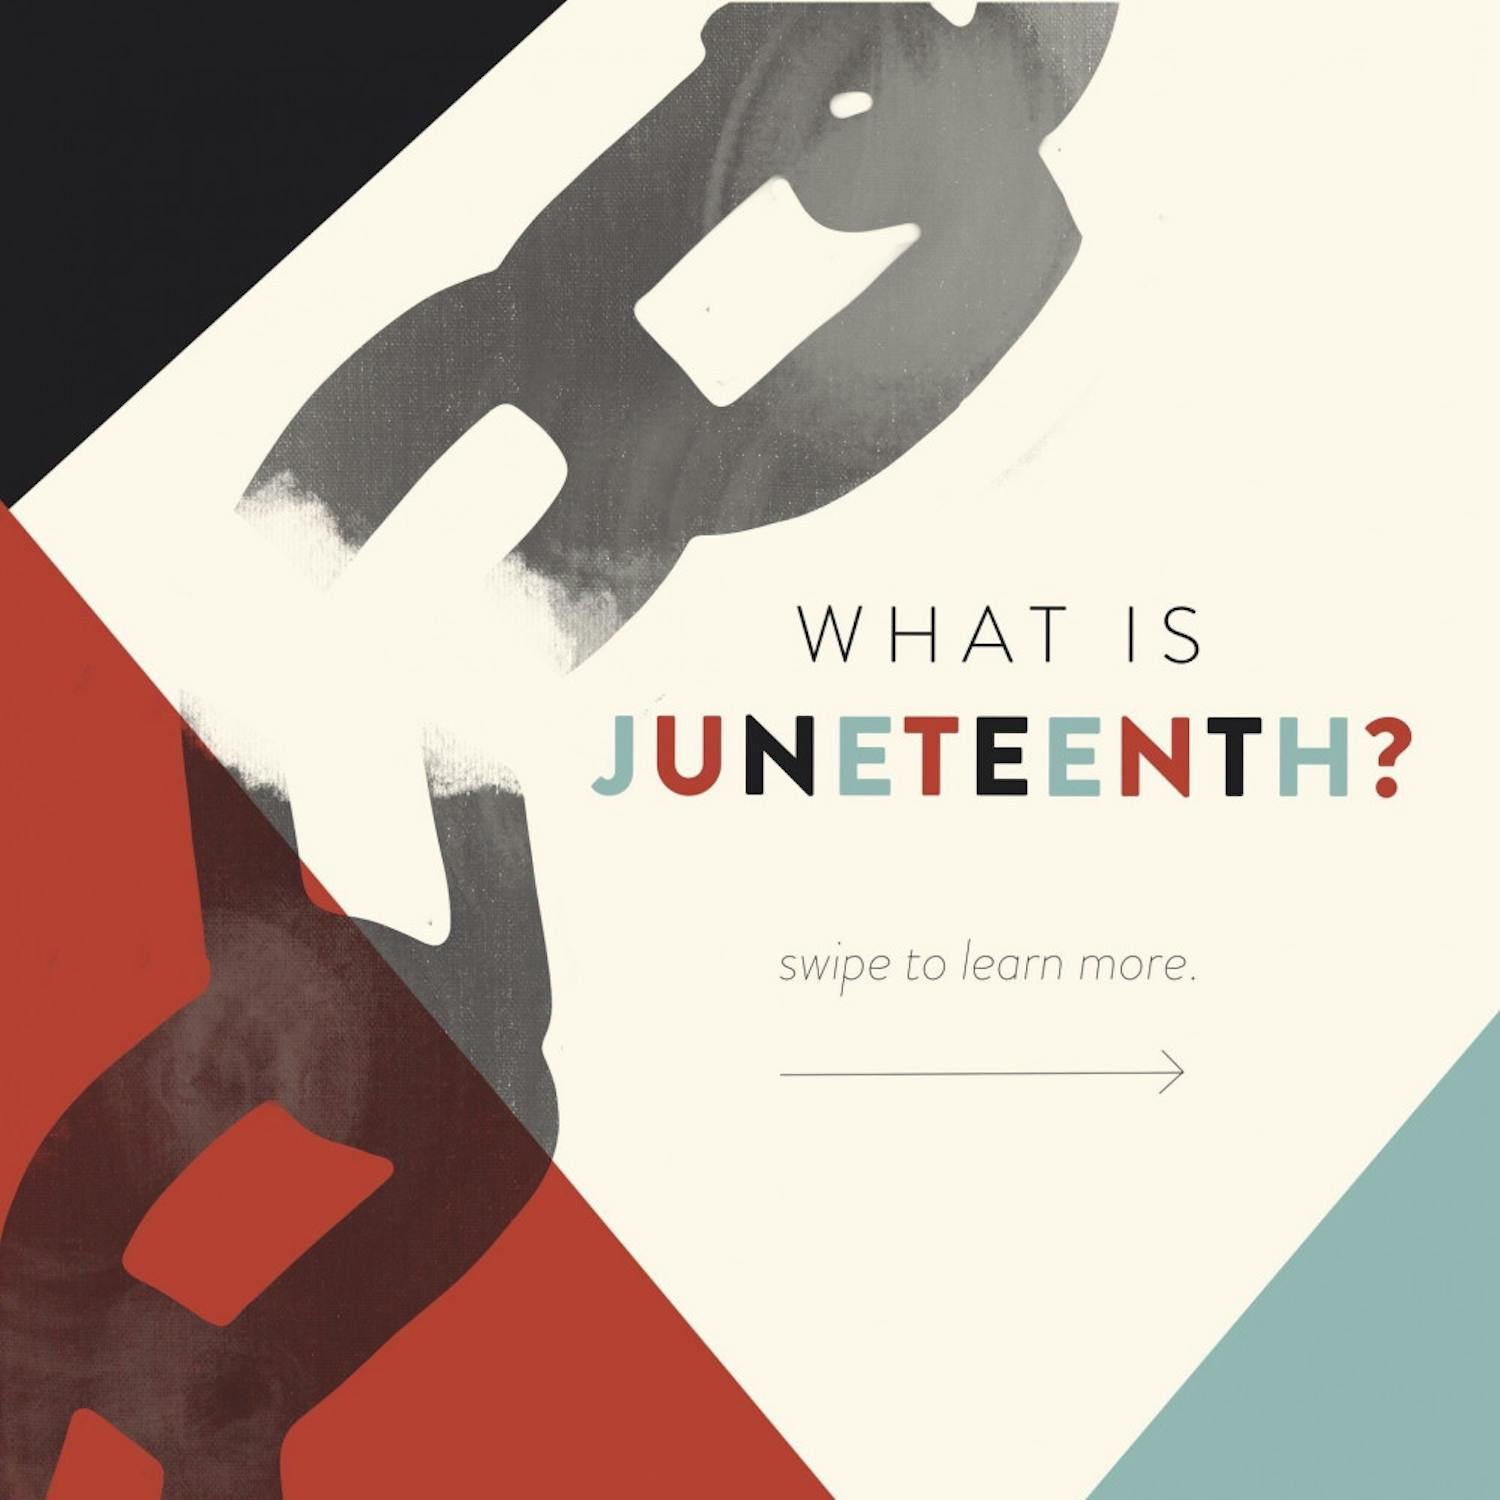 Today, we observe and celebrate Juneteenth. Juneteenth represents an end to slavery in the U.S.—two and a half years after the Emancipation Proclamation. While Juneteenth is recognized as a holiday in Florida, it’s not a federally recognized holiday. ⁣
⁣The Alligator encourages all of its readers and followers to educate themselves on the holiday and the history of slavery in the U.S. ⁣